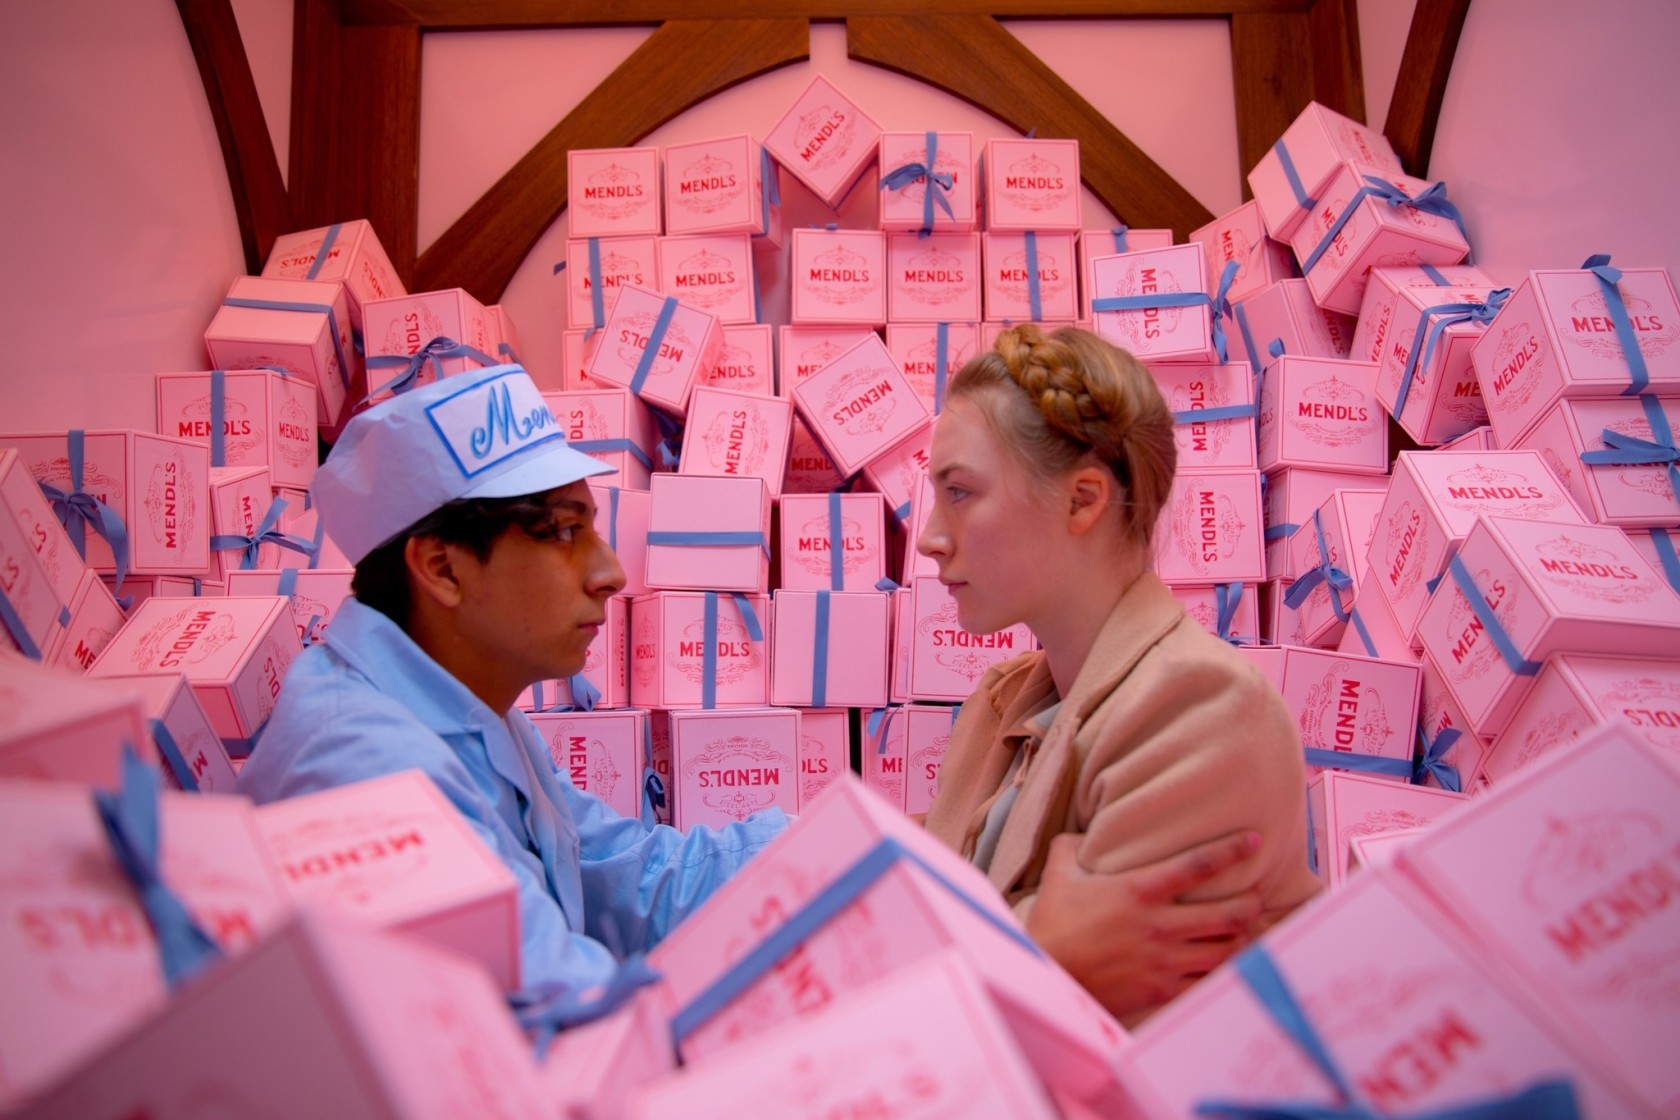 Zero and Agatha from Wes Anderson's movie The Grand Budapest Hotel (2014) hold each other in the back of a truck surrounded by pink pastry boxes. 